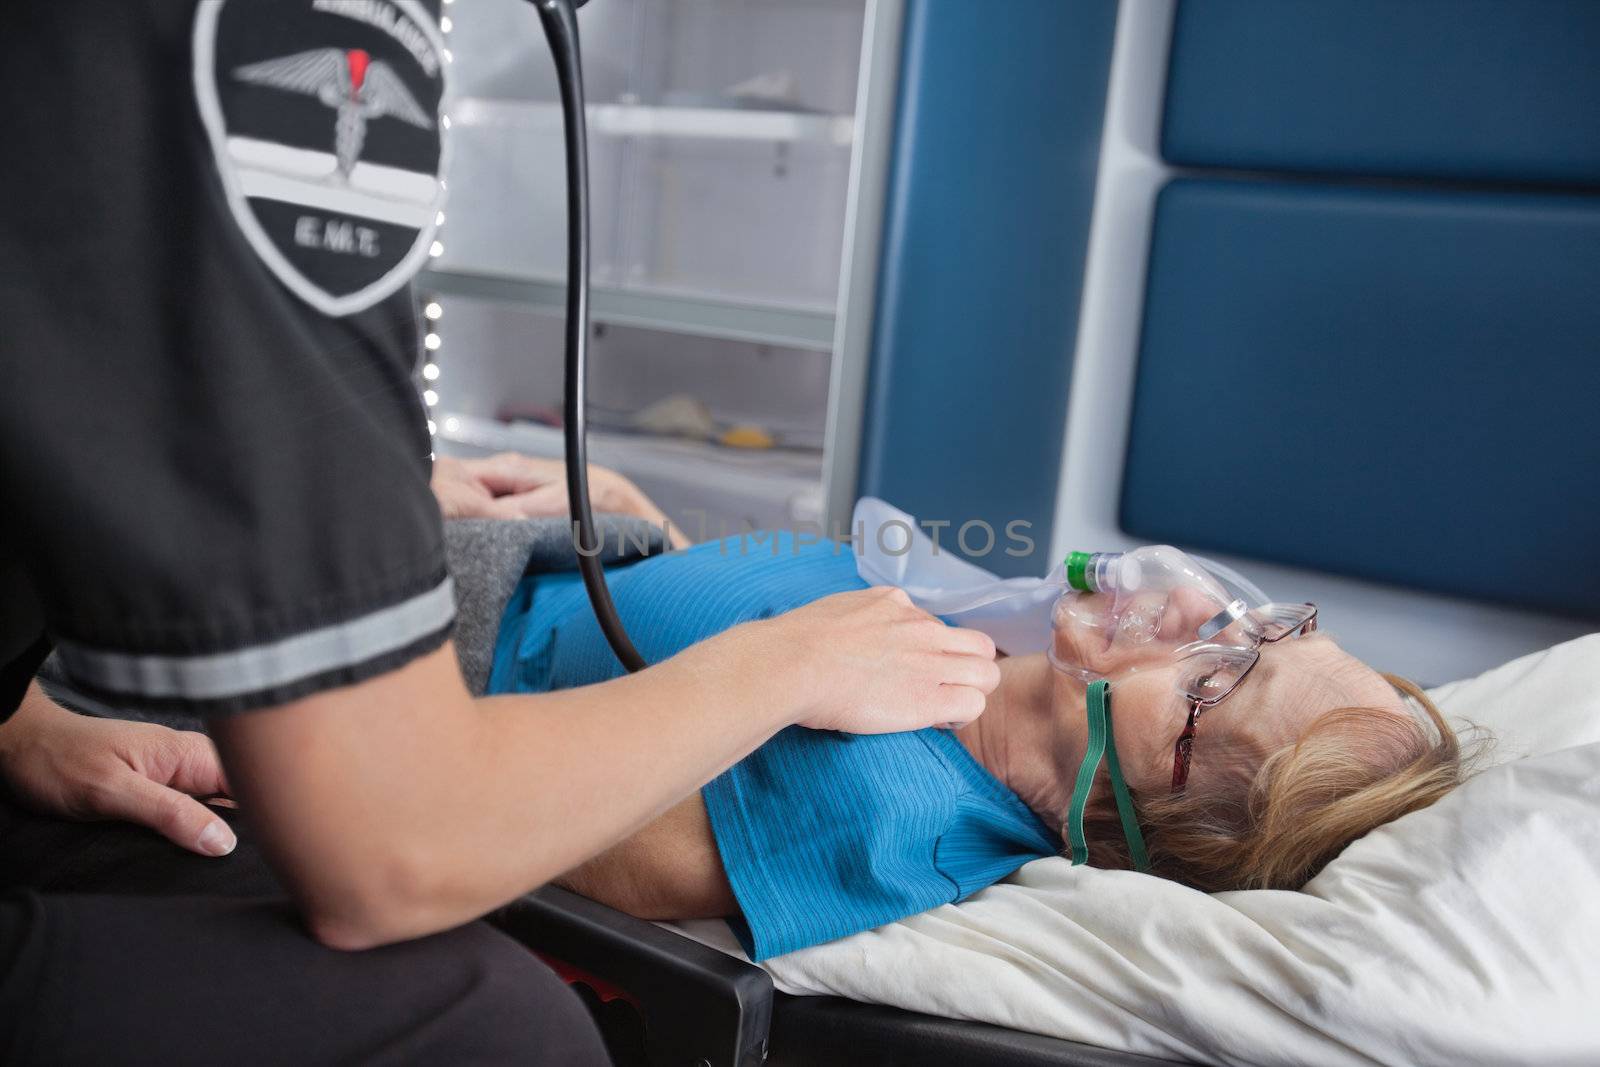 EMT worker listening to pulse of senior woman patient in ambulance